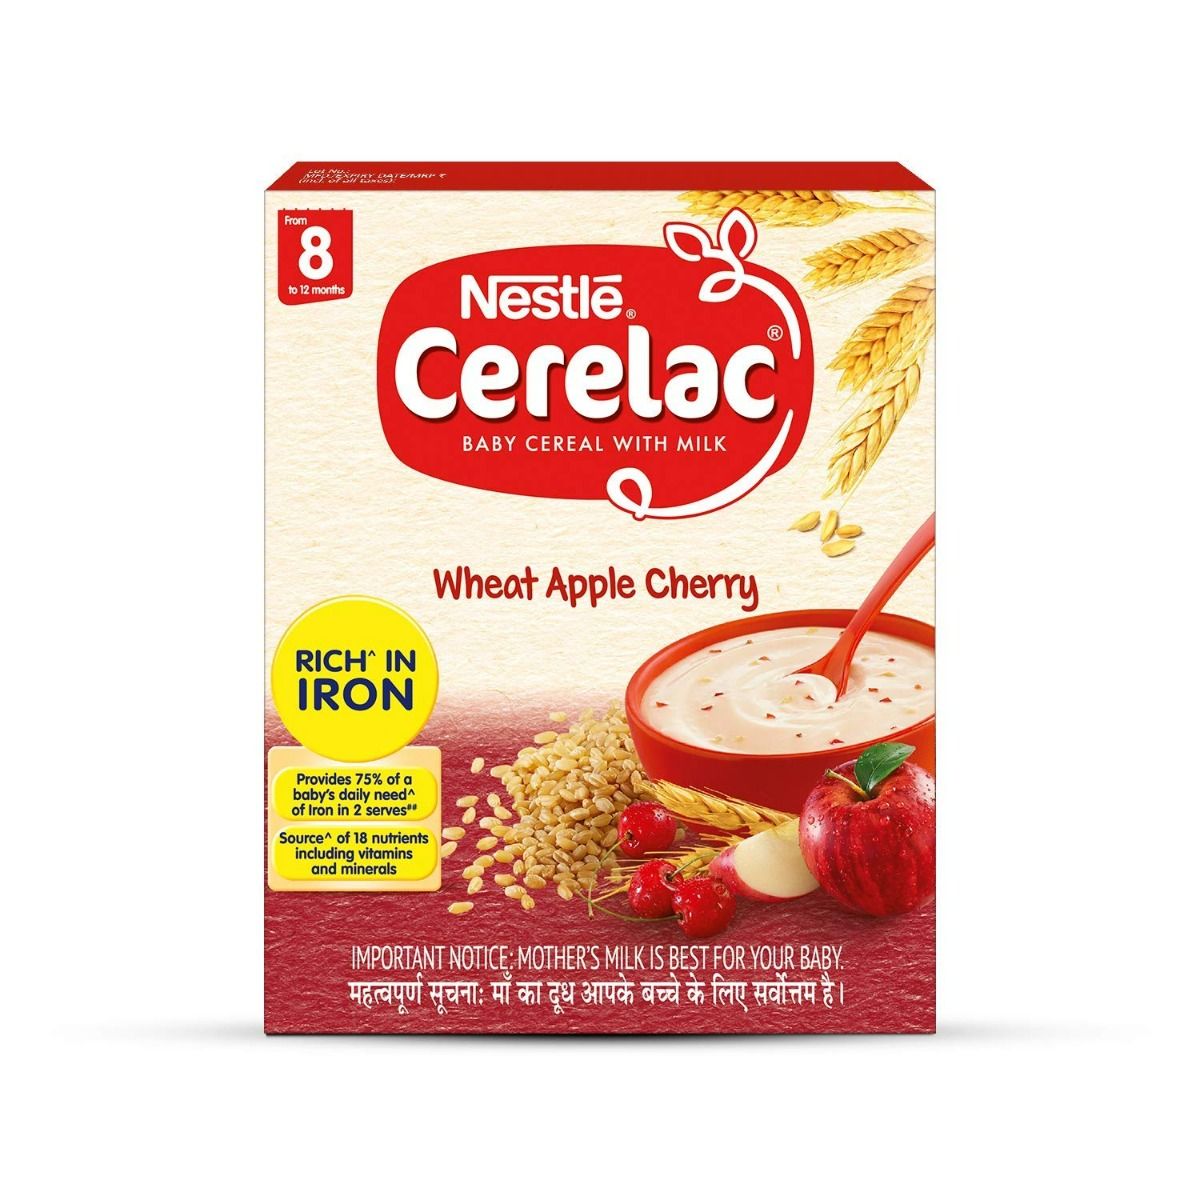 Buy Nestle Cerelac Baby Cereal with Milk Wheat Apple Cherry (From 8 to 12 Months) Powder, 300 gm Refill Pack Online